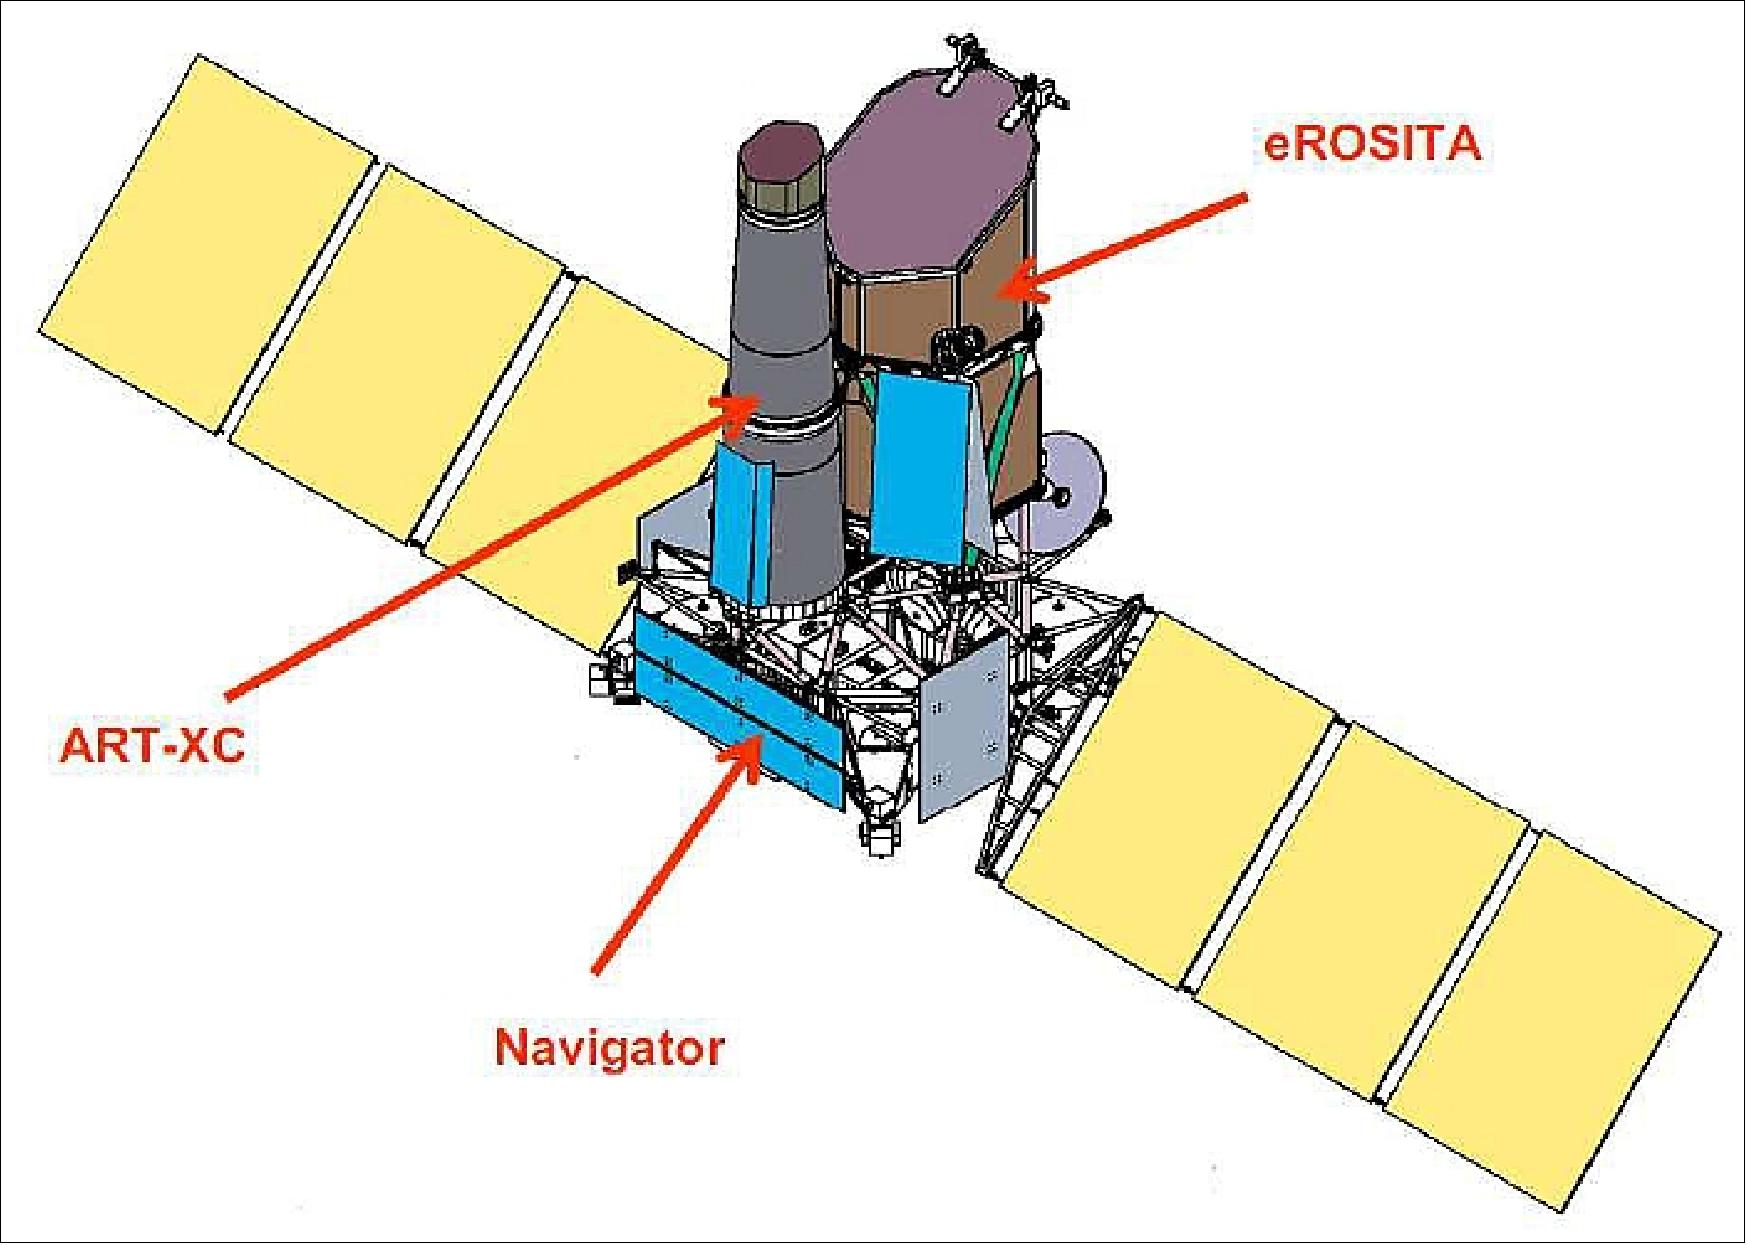 Figure 2: Artist's view of the deployed SRG spacecraft (image credit: IKI)